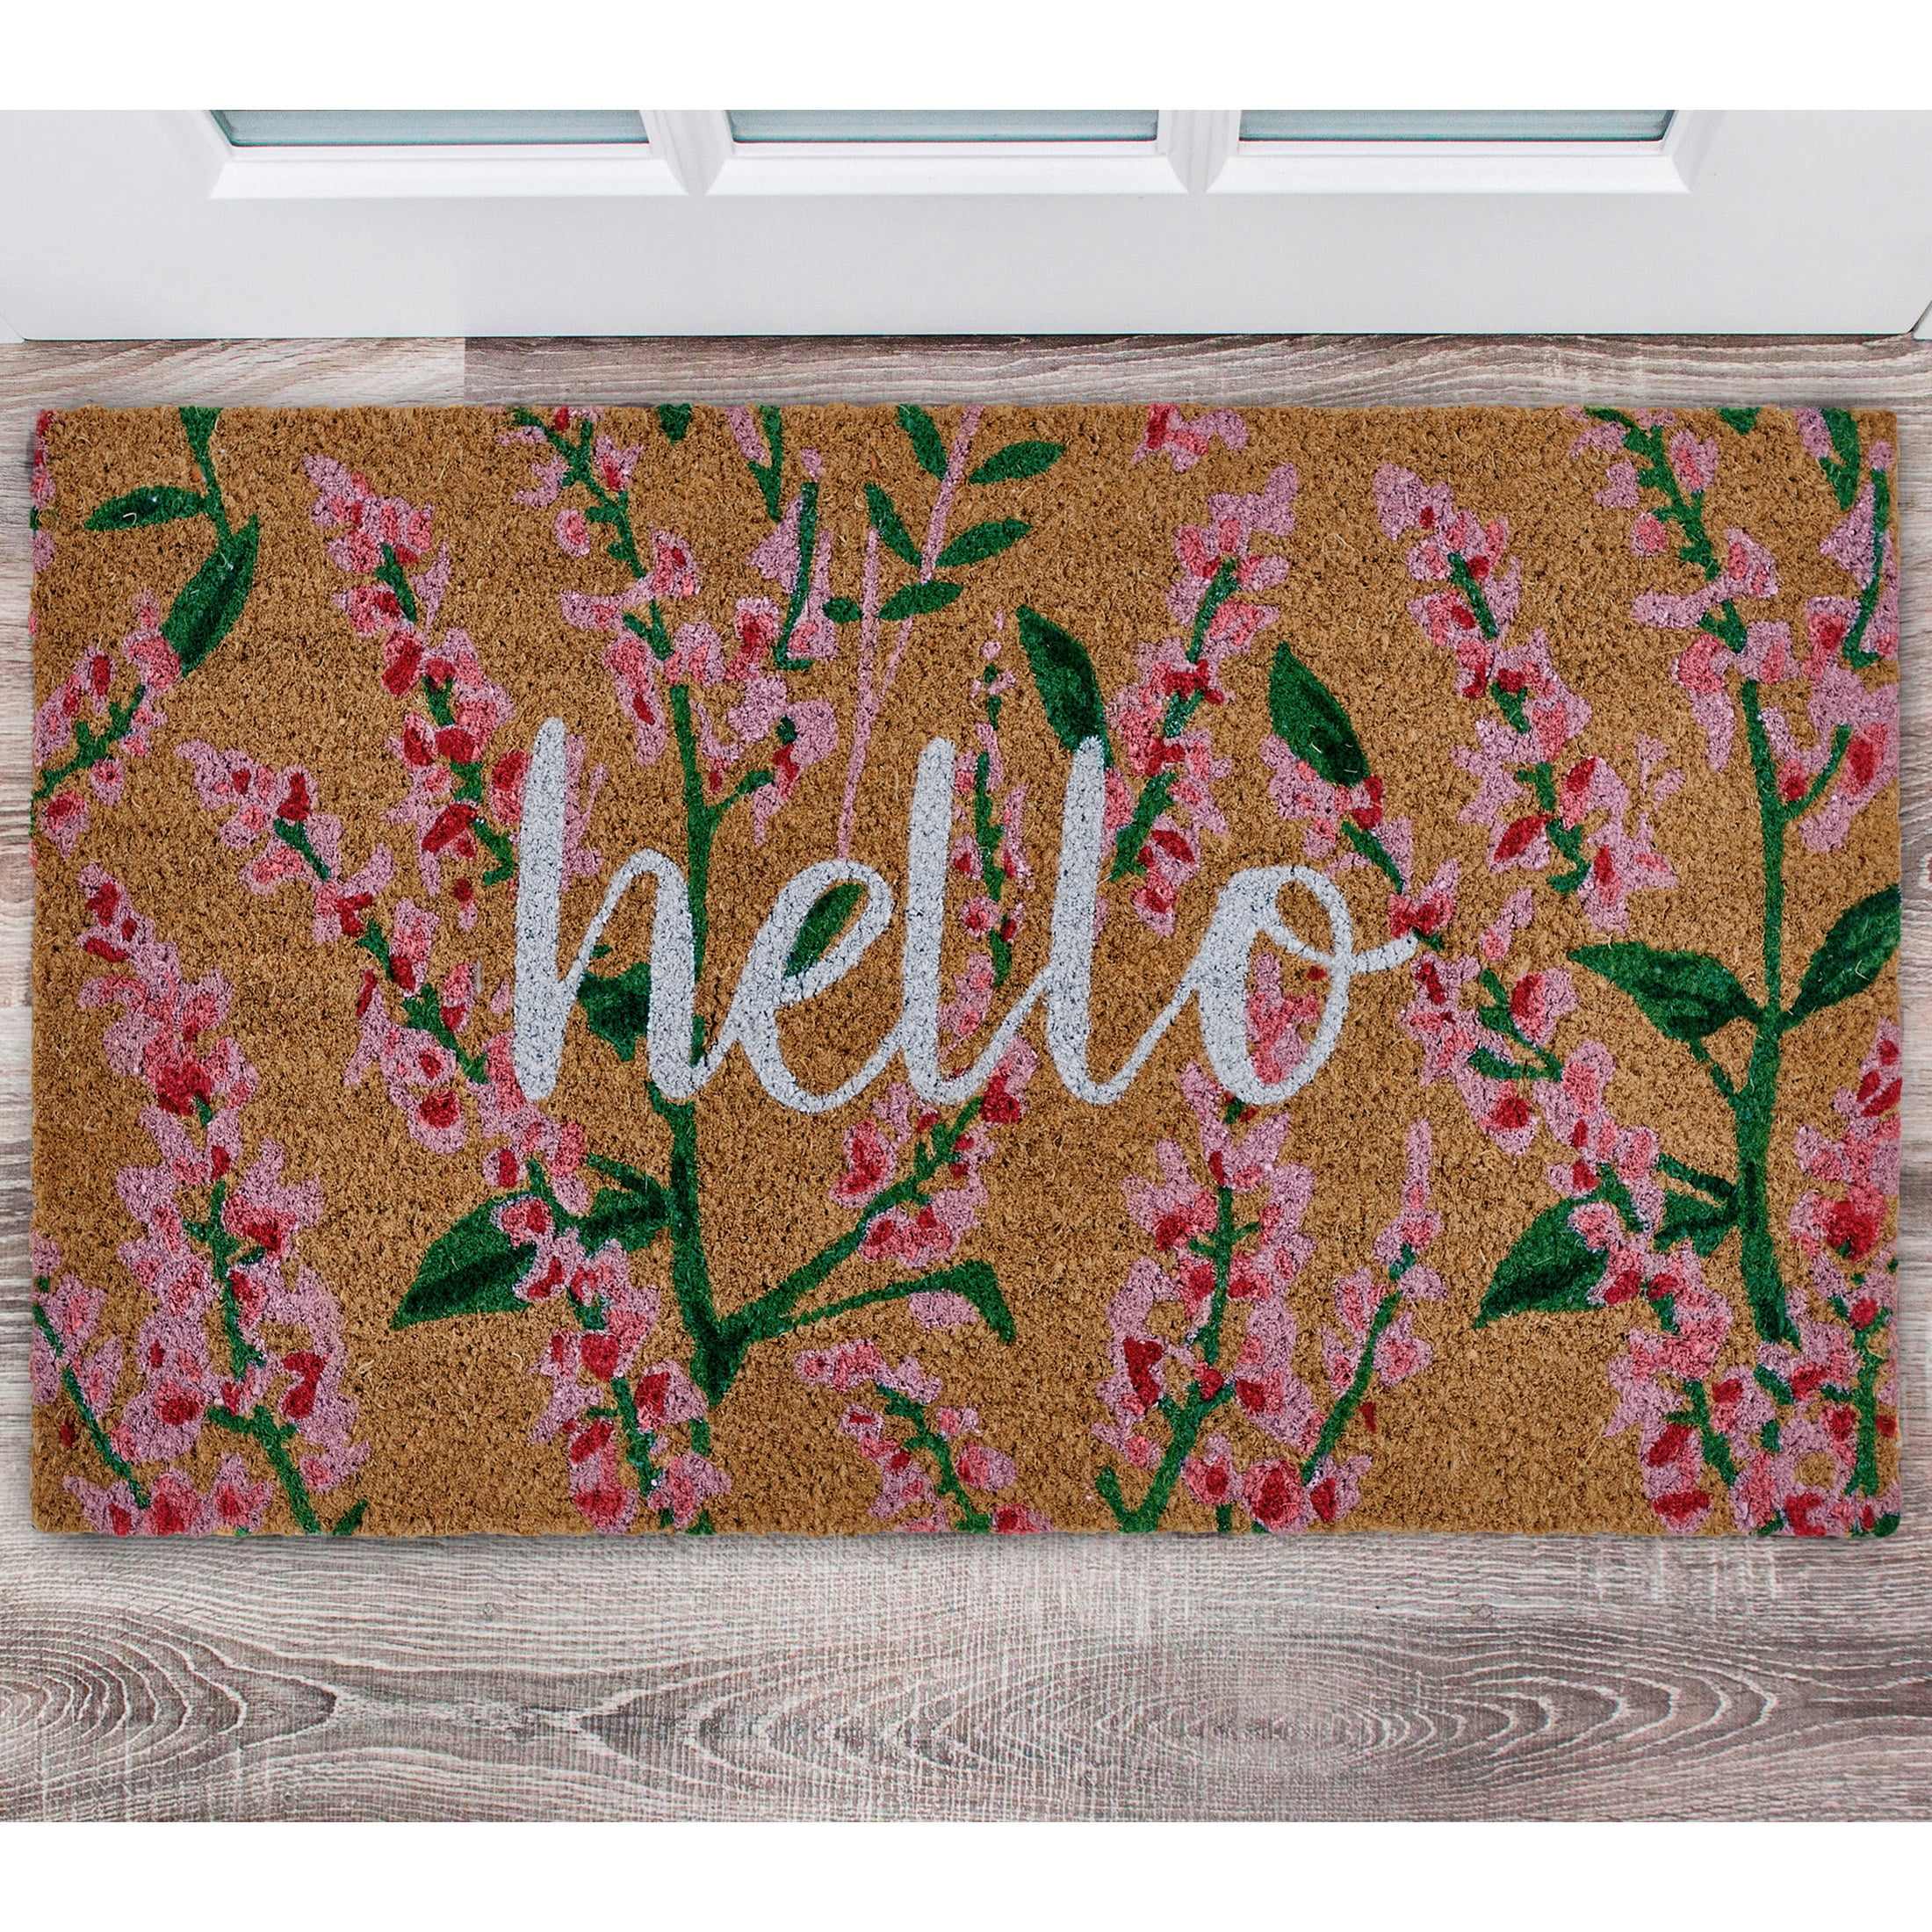 8 Spring Welcome Mats for Your Home